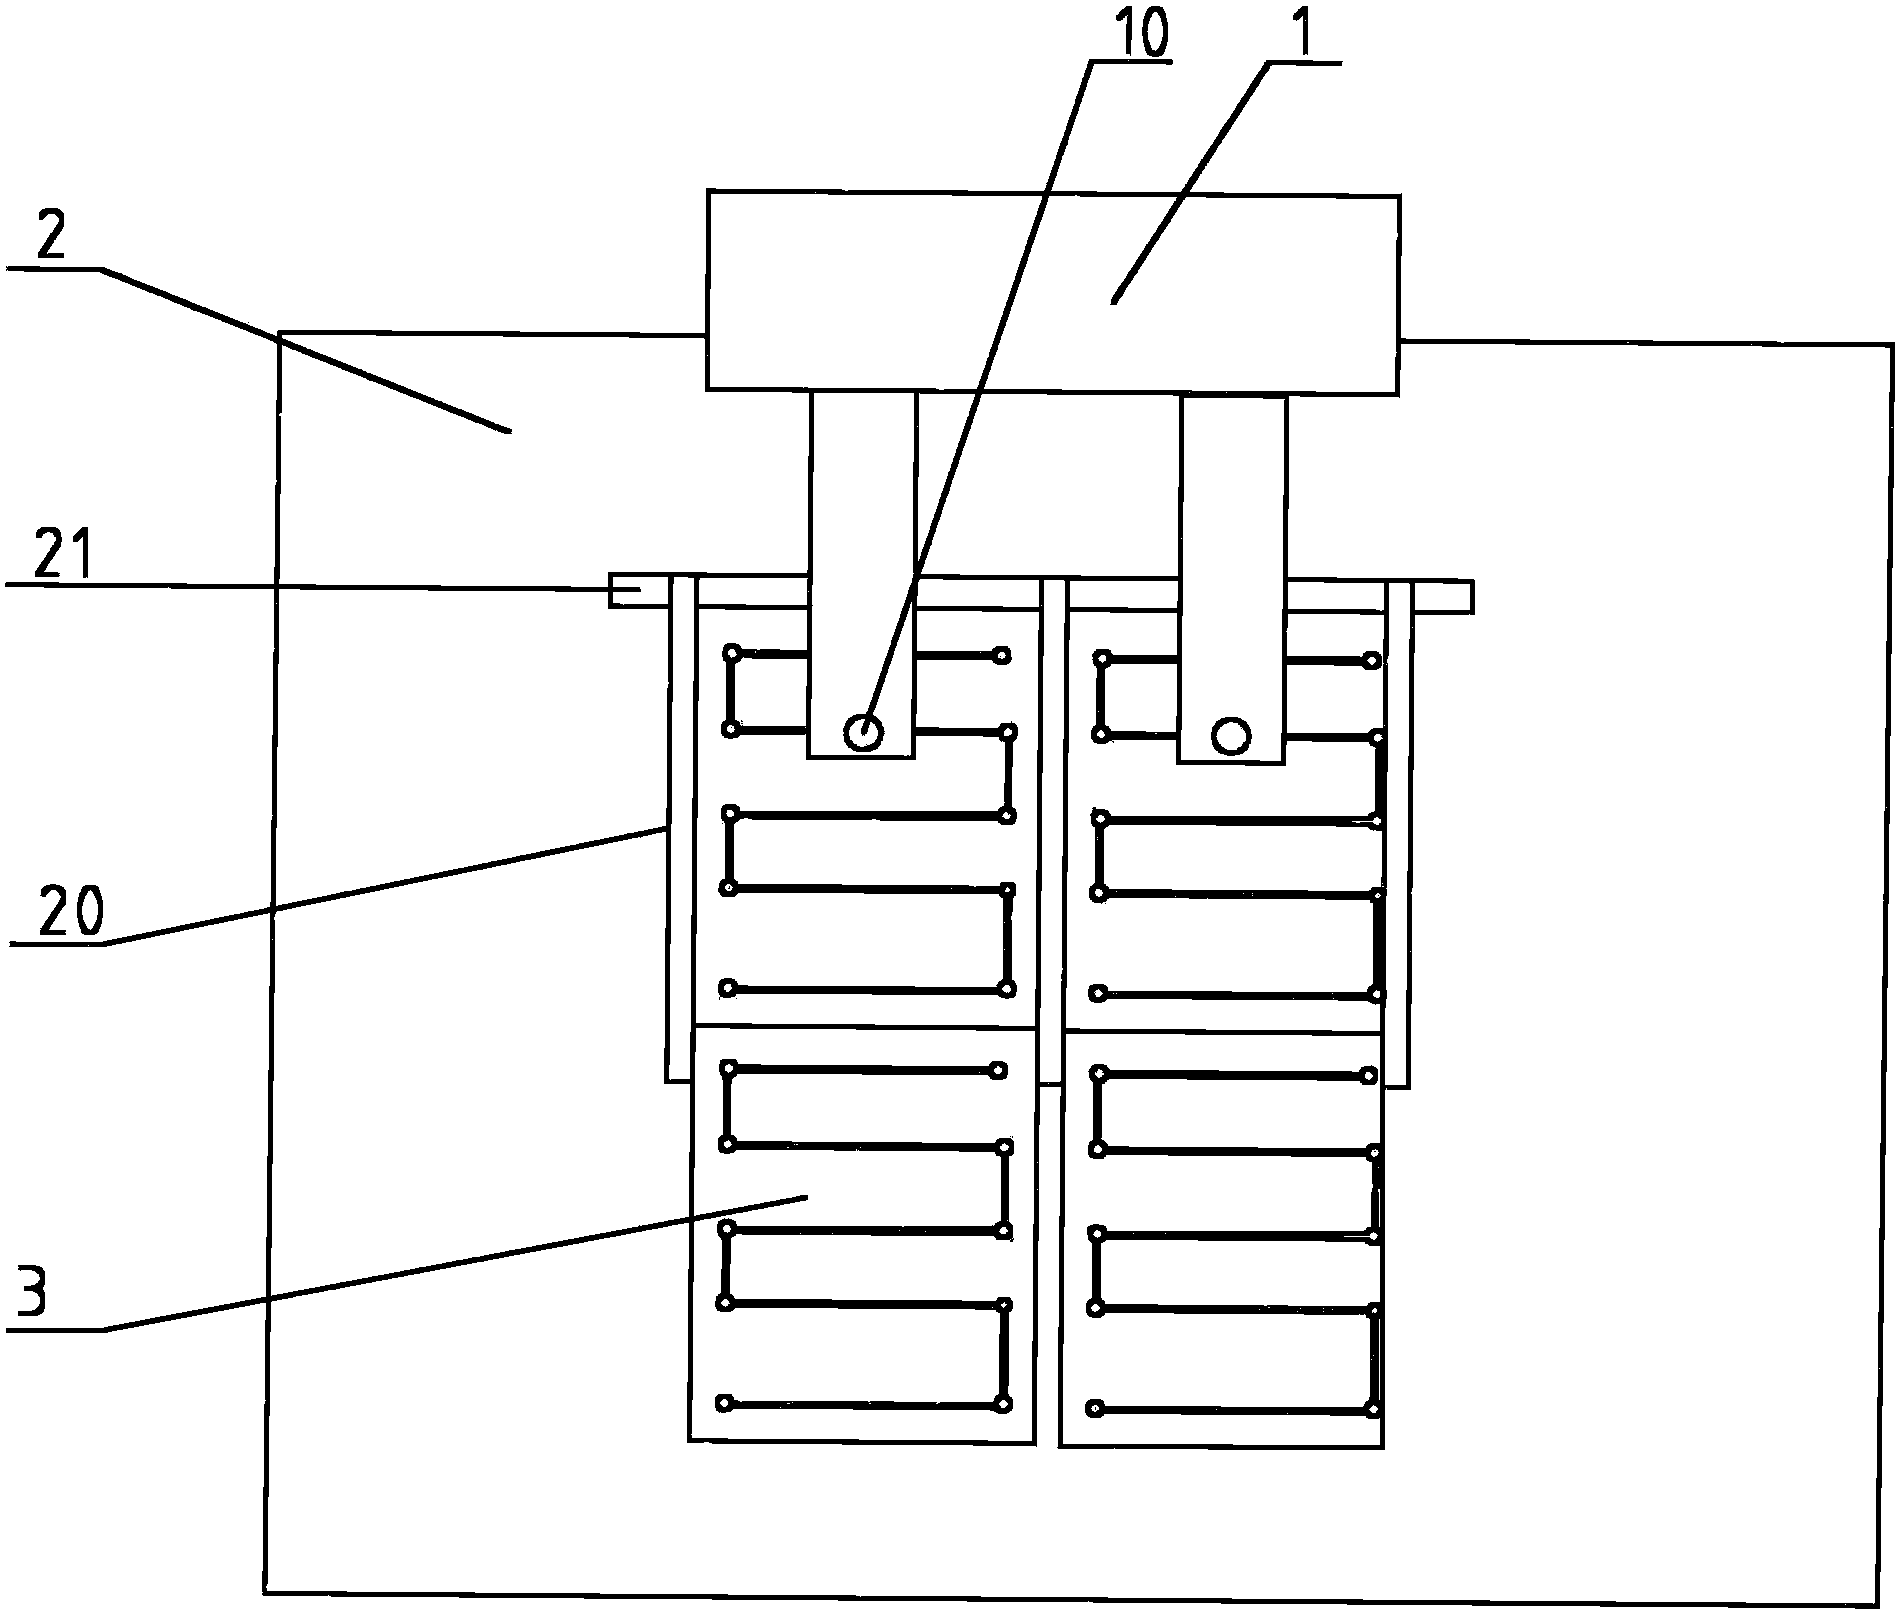 Glue injection method for automatic dispenser